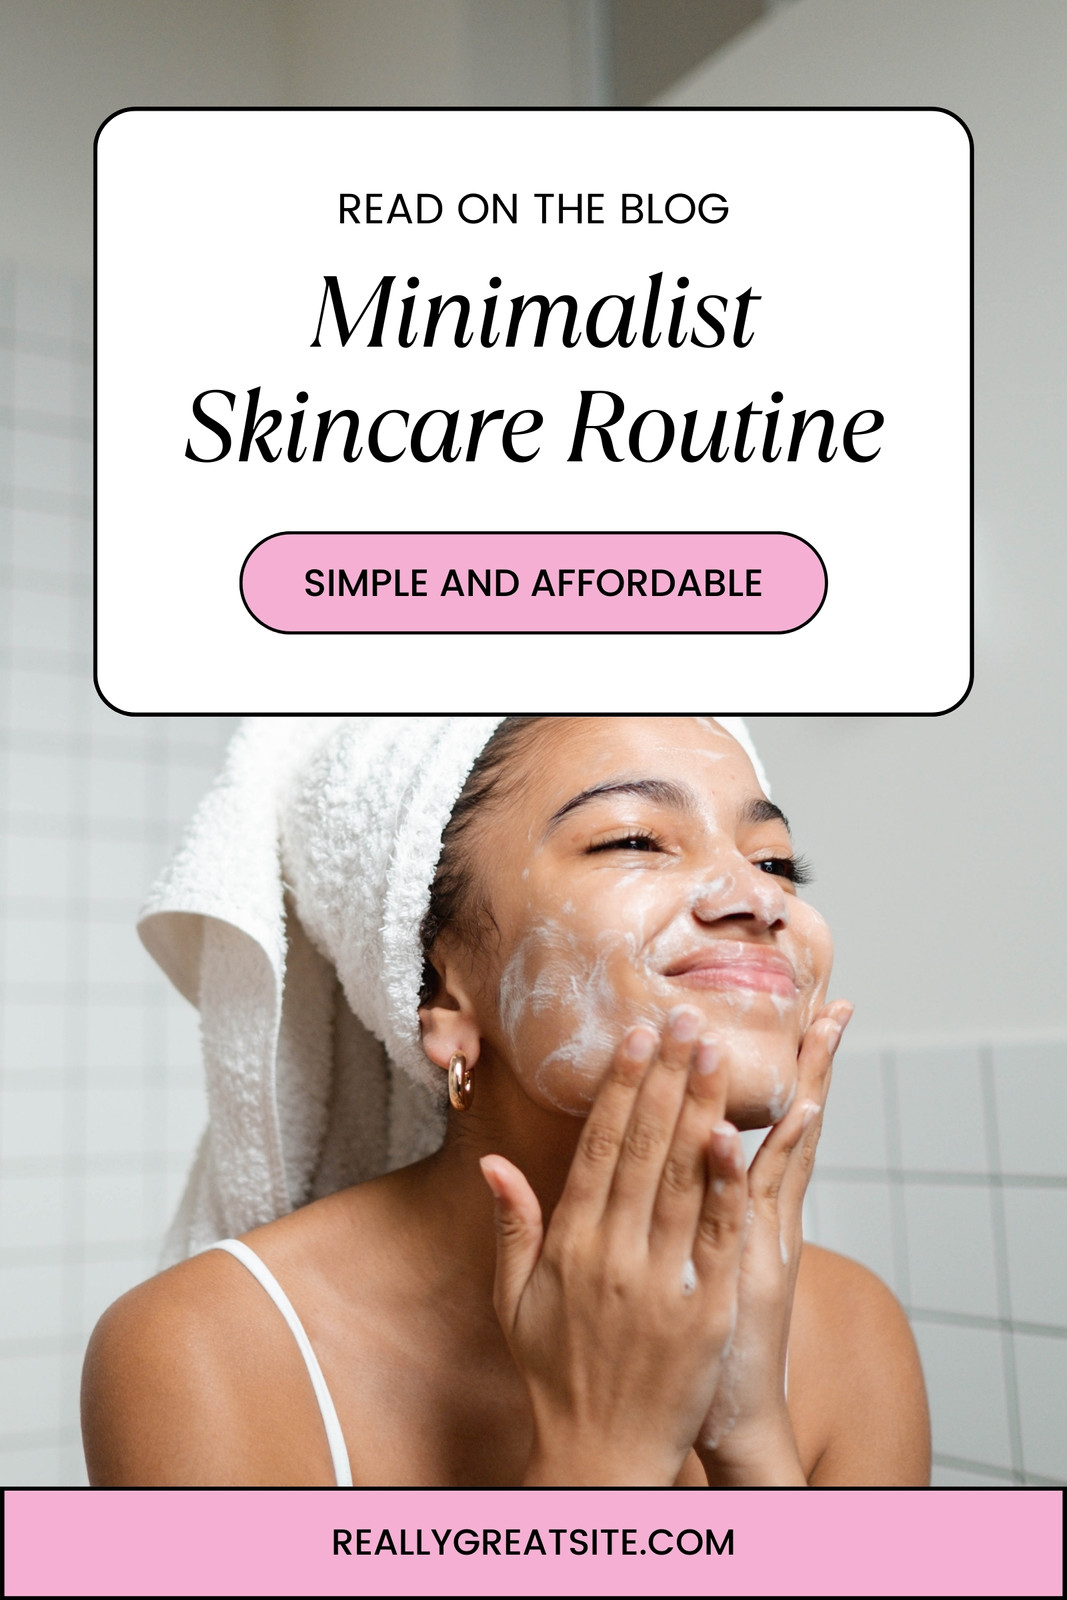 Page 2 - Free and customizable skincare templates